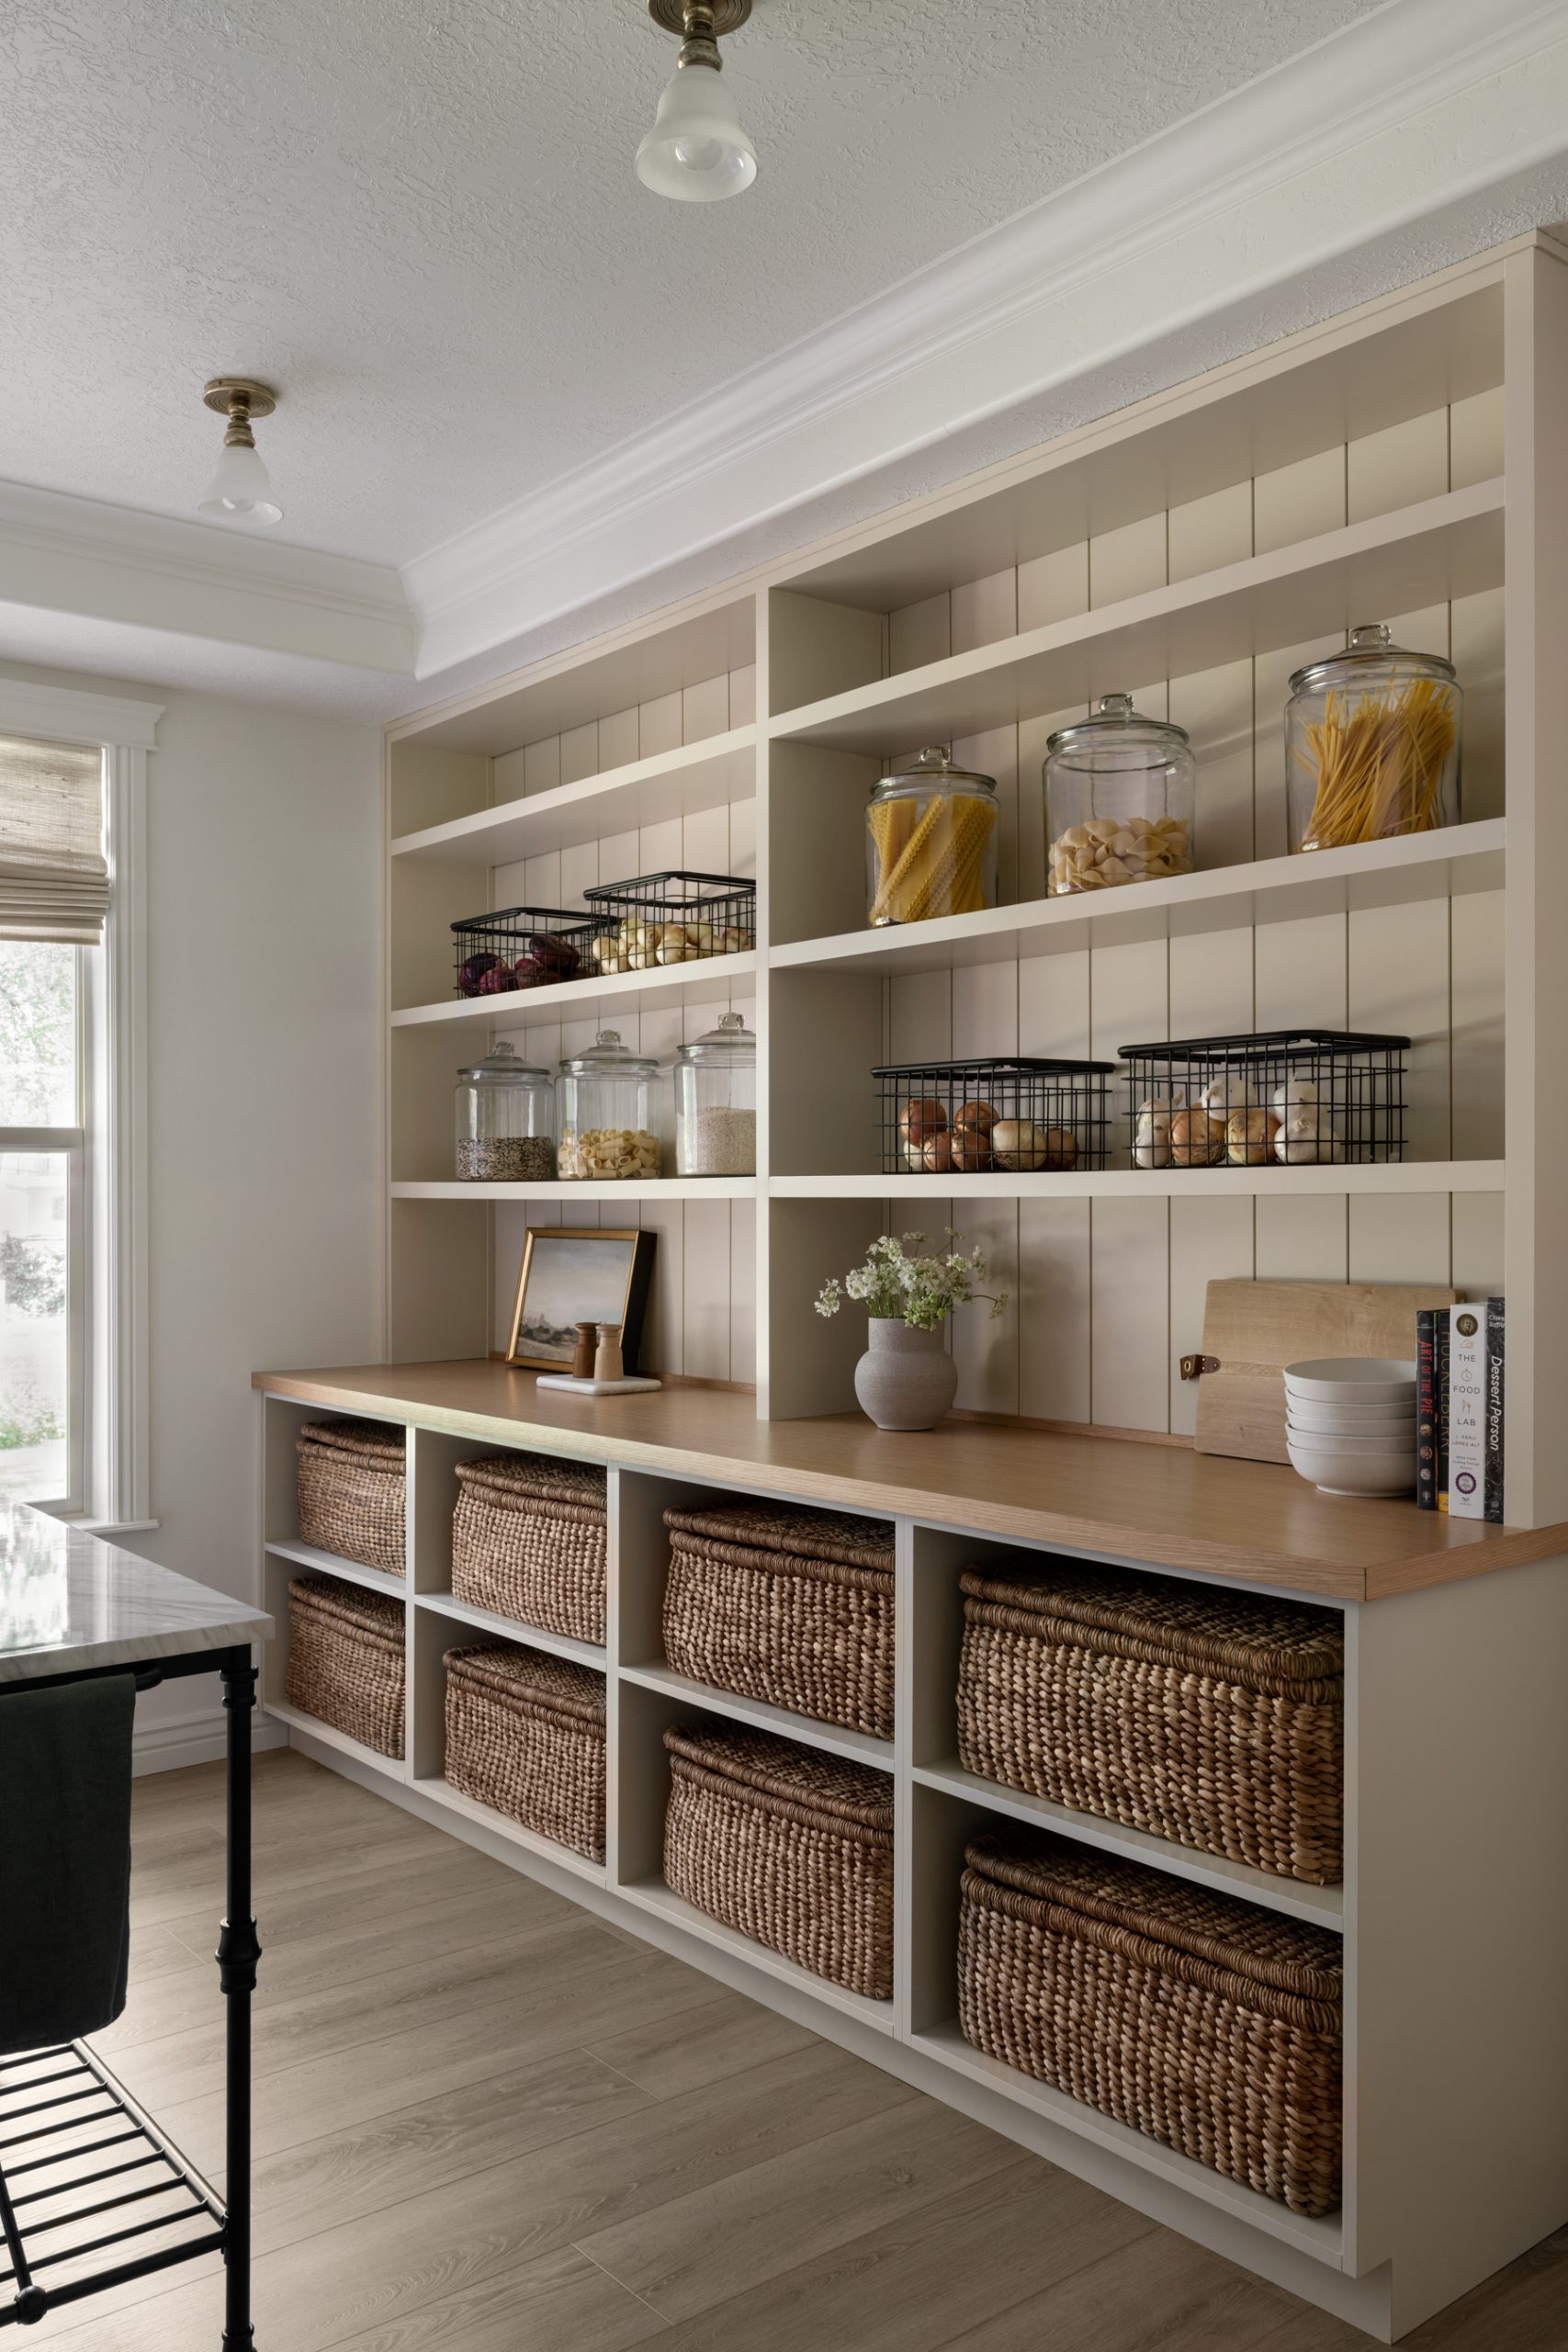 The Cottonwood Kitchen Remodel pantry shelving